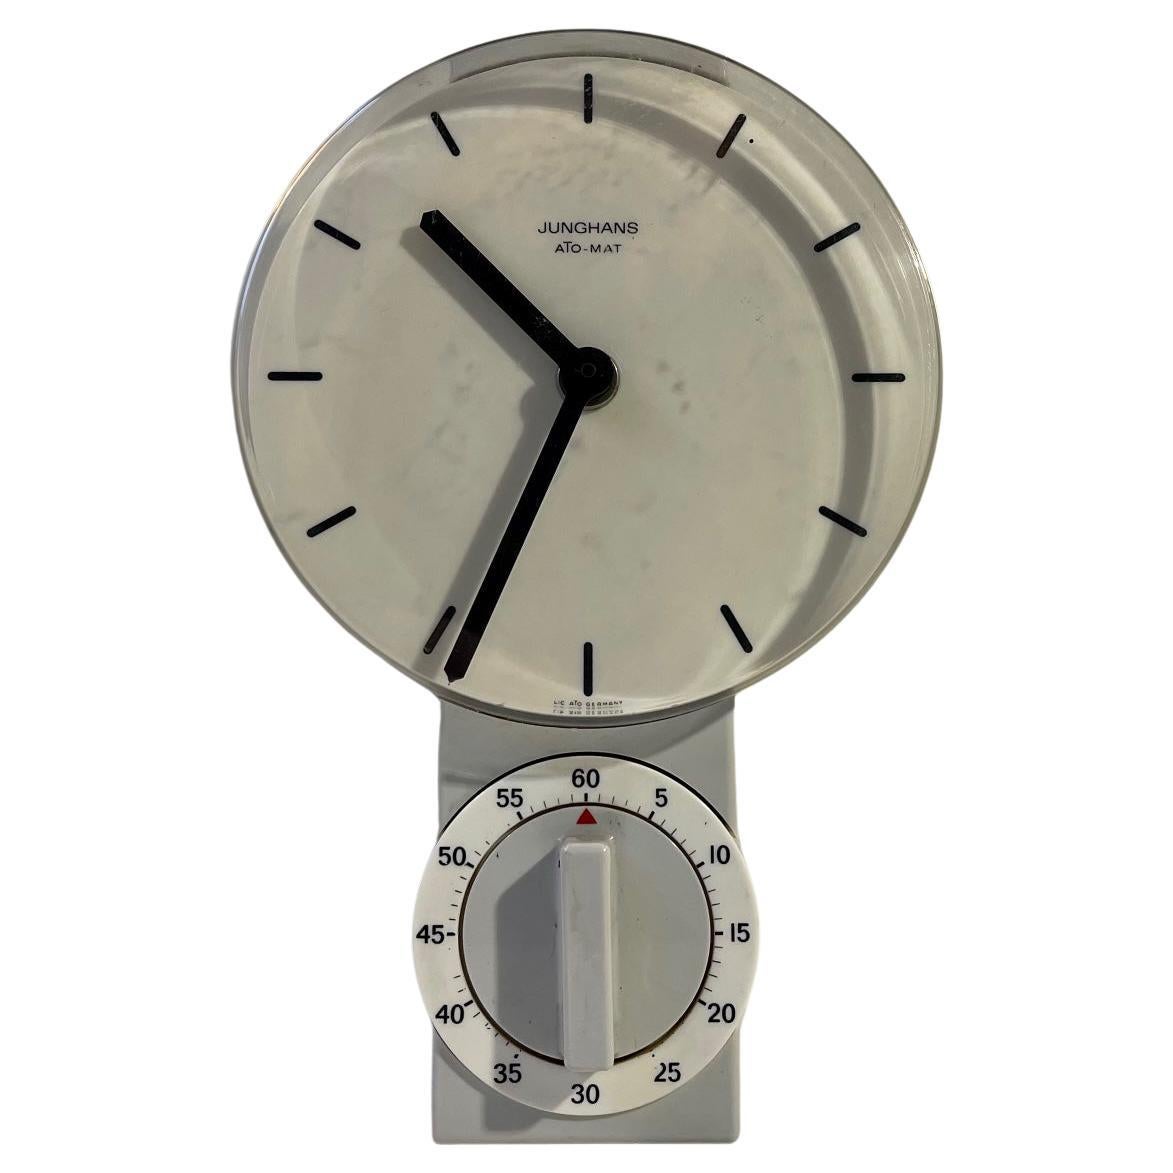 Junghans Ato-Mat Kitchen Wall Clock with Removable Egg Timer, 1970s For Sale